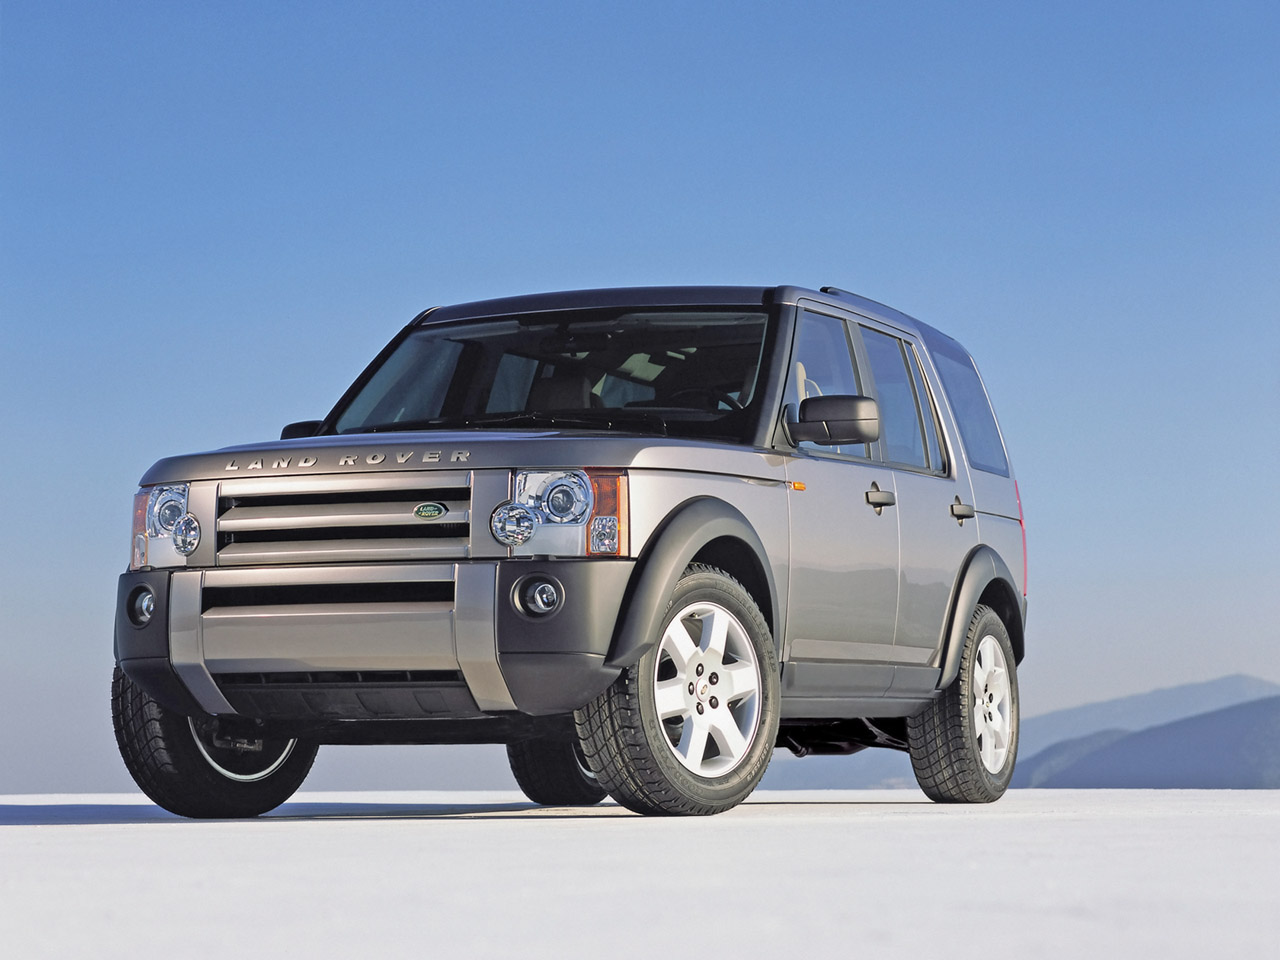 LandRover Discovery TDV6 technical details, history